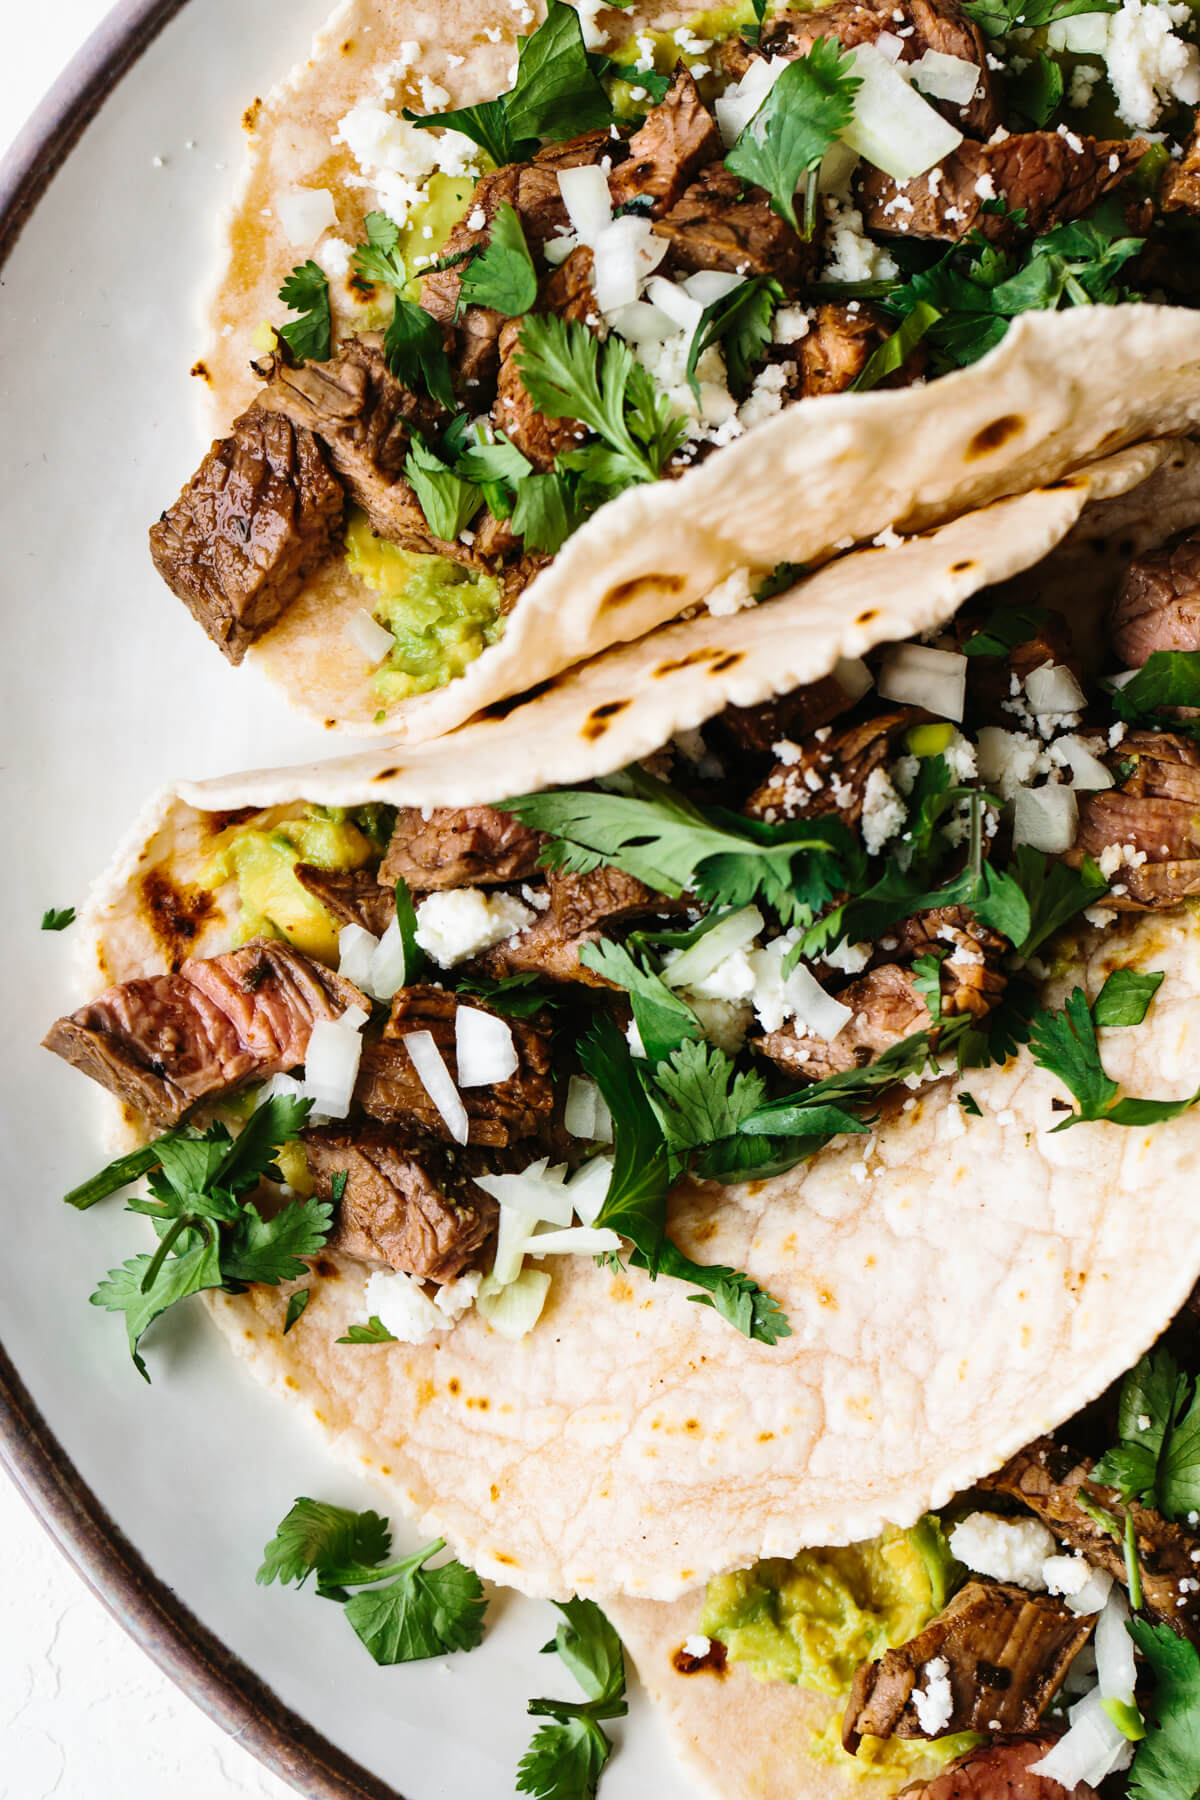 Carne asada tacos next to each other on a plate.